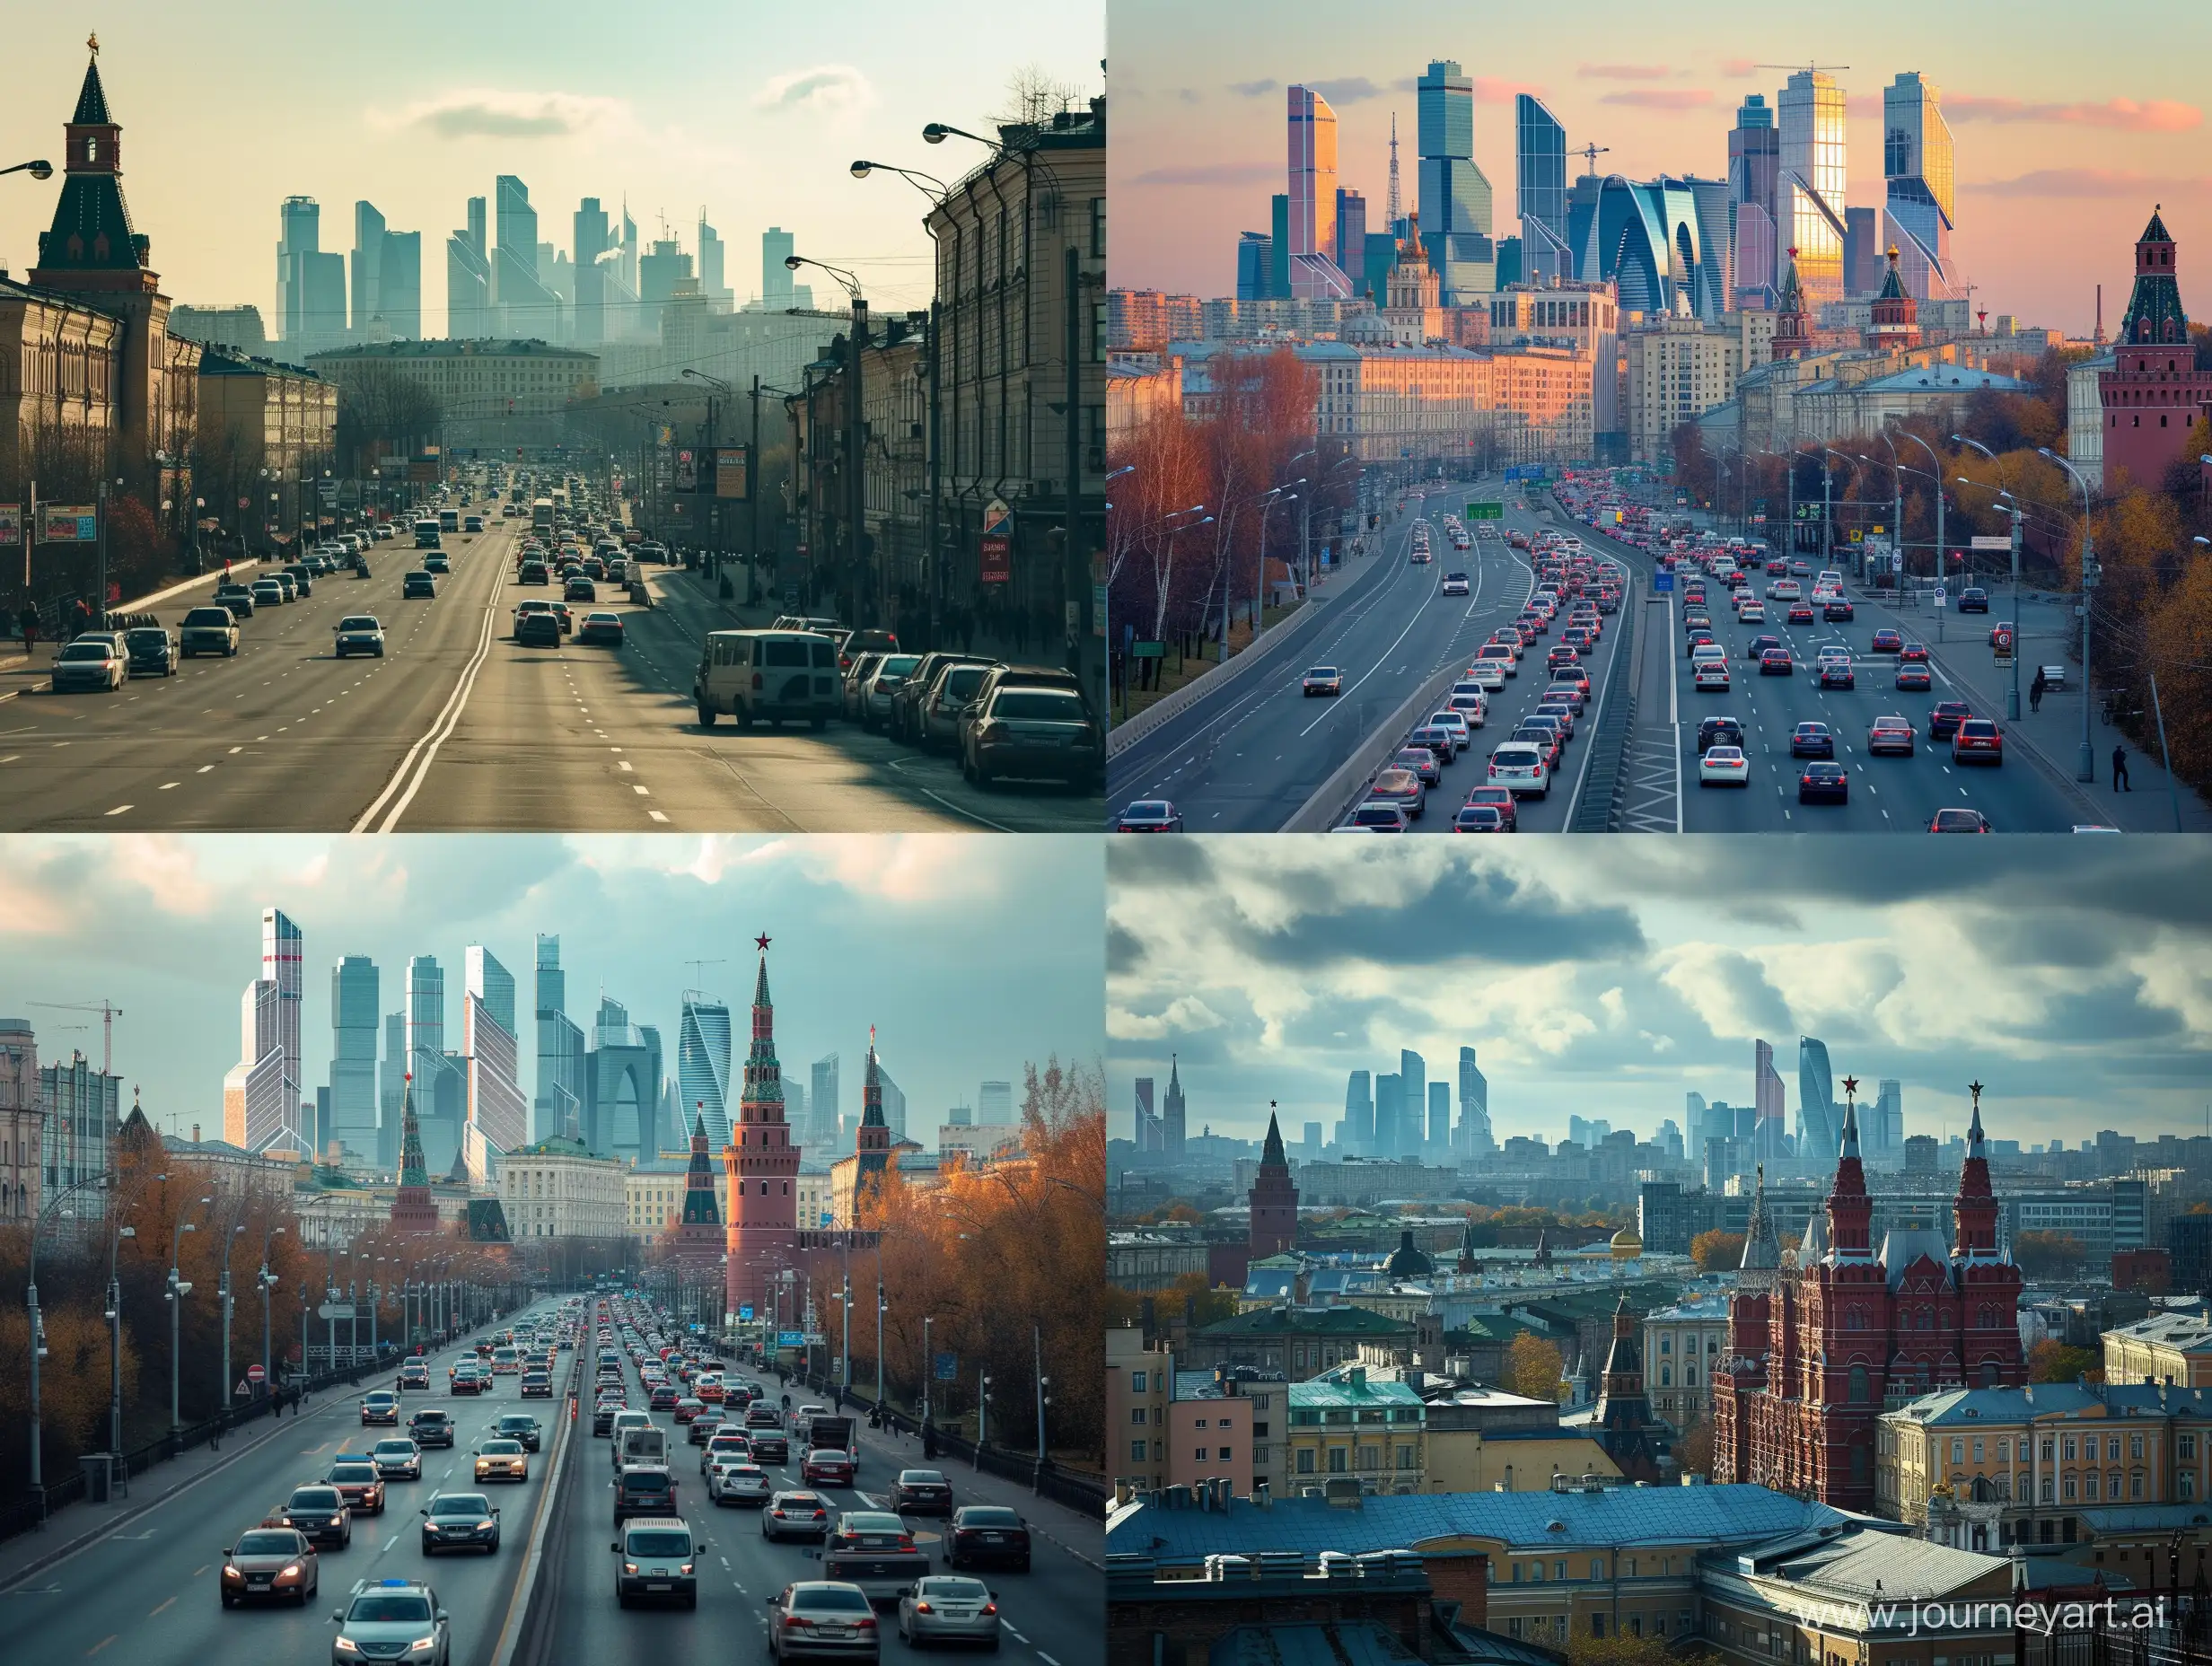 moscow, day time, environment, photograph, photo, skyline, architecture, bustling
